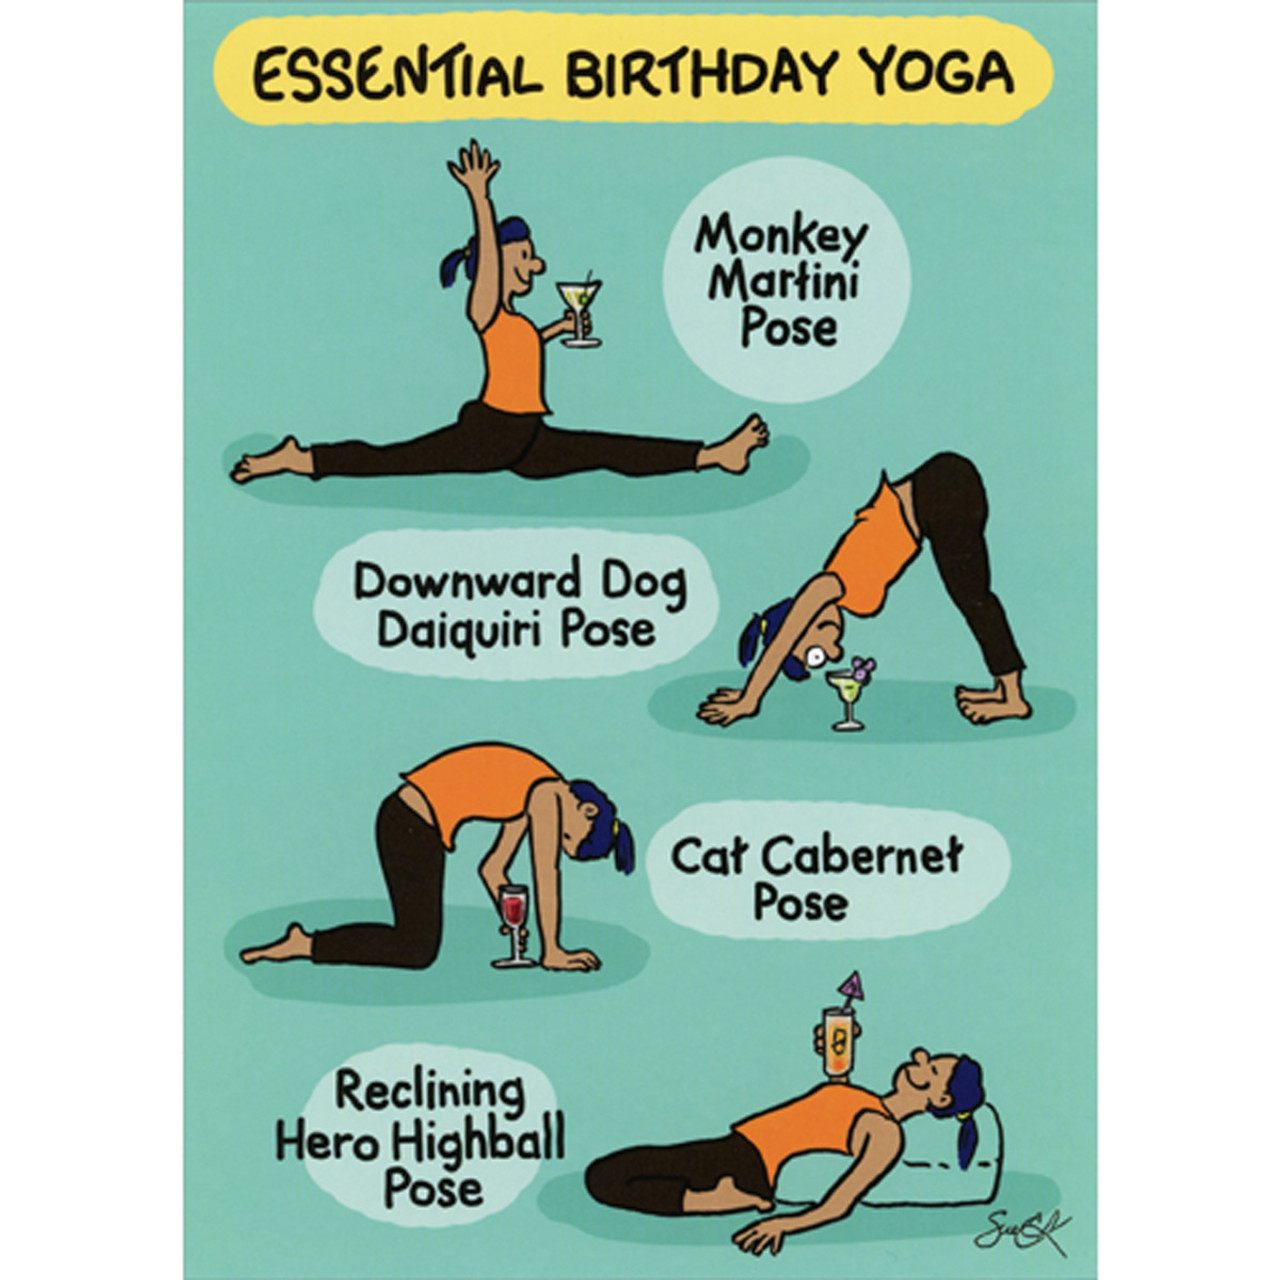 Essential Birthday Yoga Poses with Drinks Funny / Humorous Birthday Card